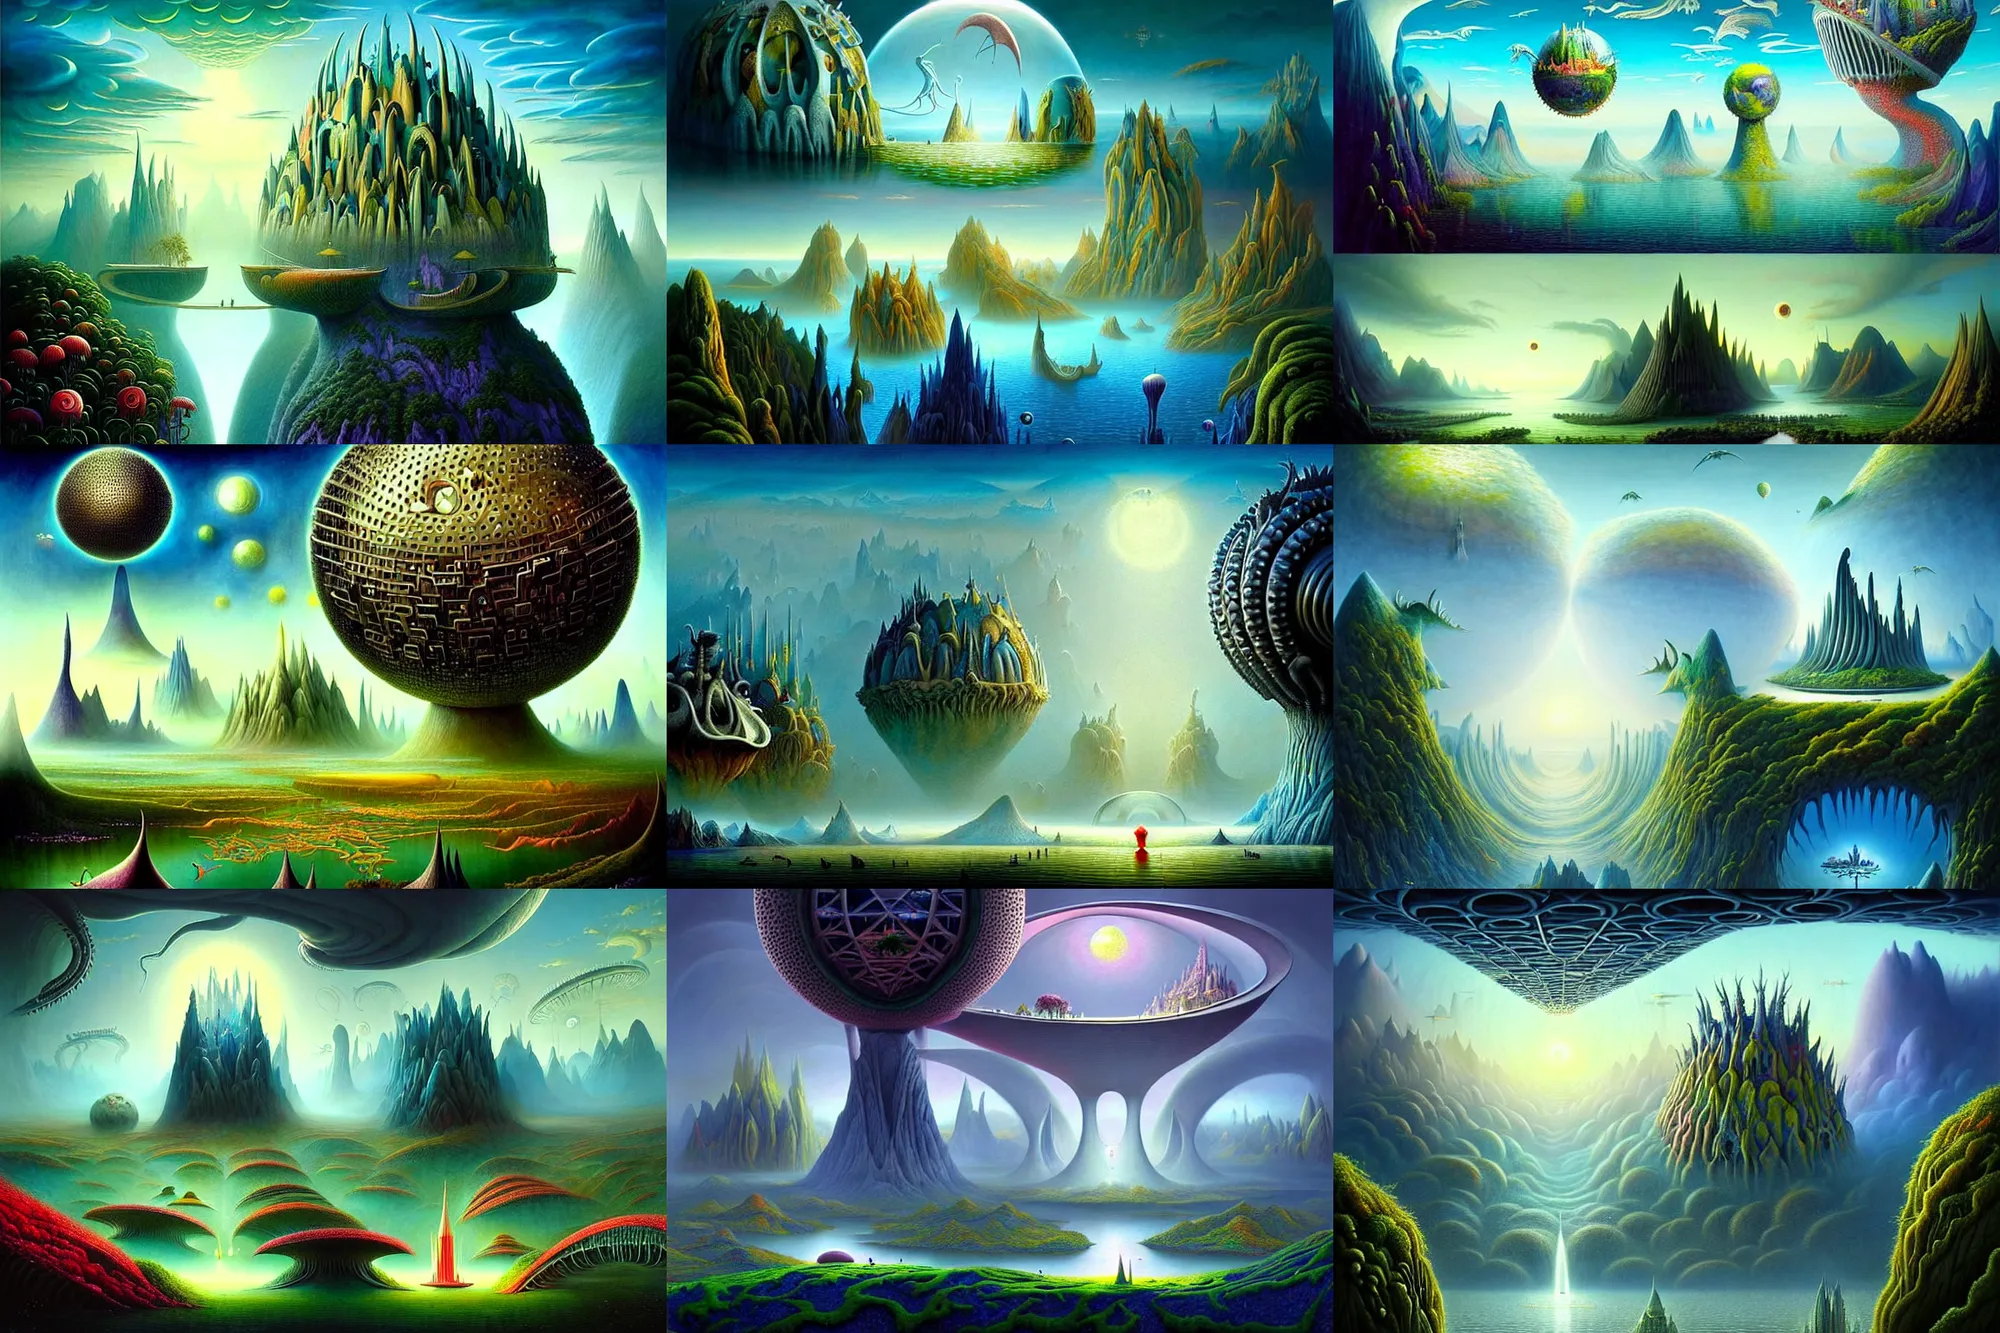 Prompt: a beautiful epic stunning amazing and insanely detailed matte painting of alien dream worlds with surreal architecture designed by Heironymous Bosch, mega structures inspired by Heironymous Bosch's Garden of Earthly Delights, vast surreal landscape and horizon by Asher Durand and Gerald Brom and Cyril Rolando, rich pastel color palette, masterpiece!!, grand!, imaginative!!!, whimsical!!, epic scale, intricate details, sense of awe, elite, fantasy realism, complex composition, 4k post processing